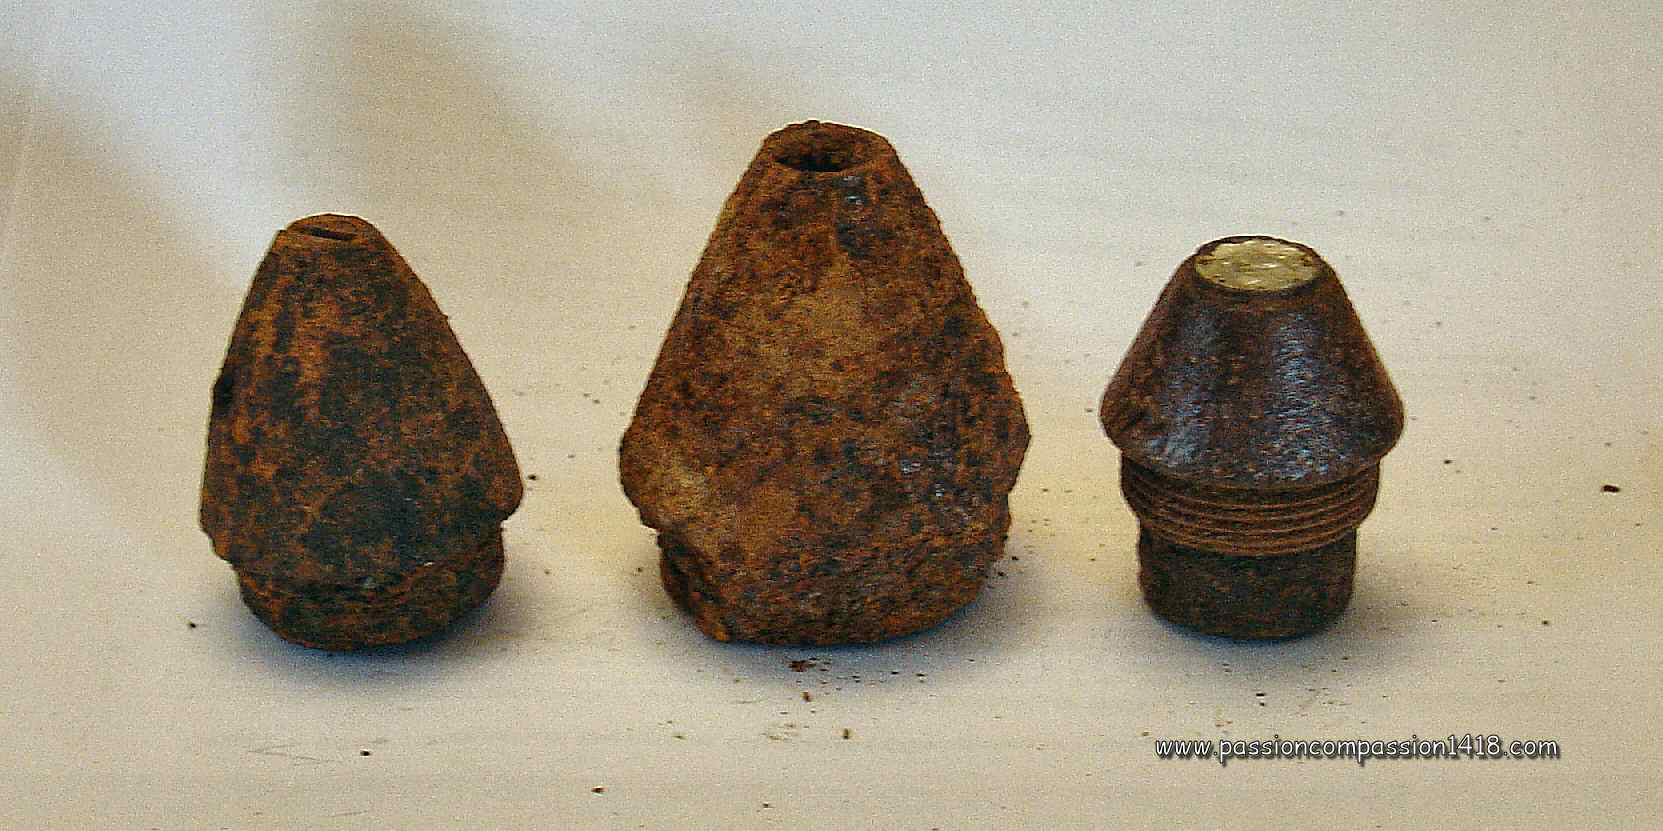 Three unidentified small fuses